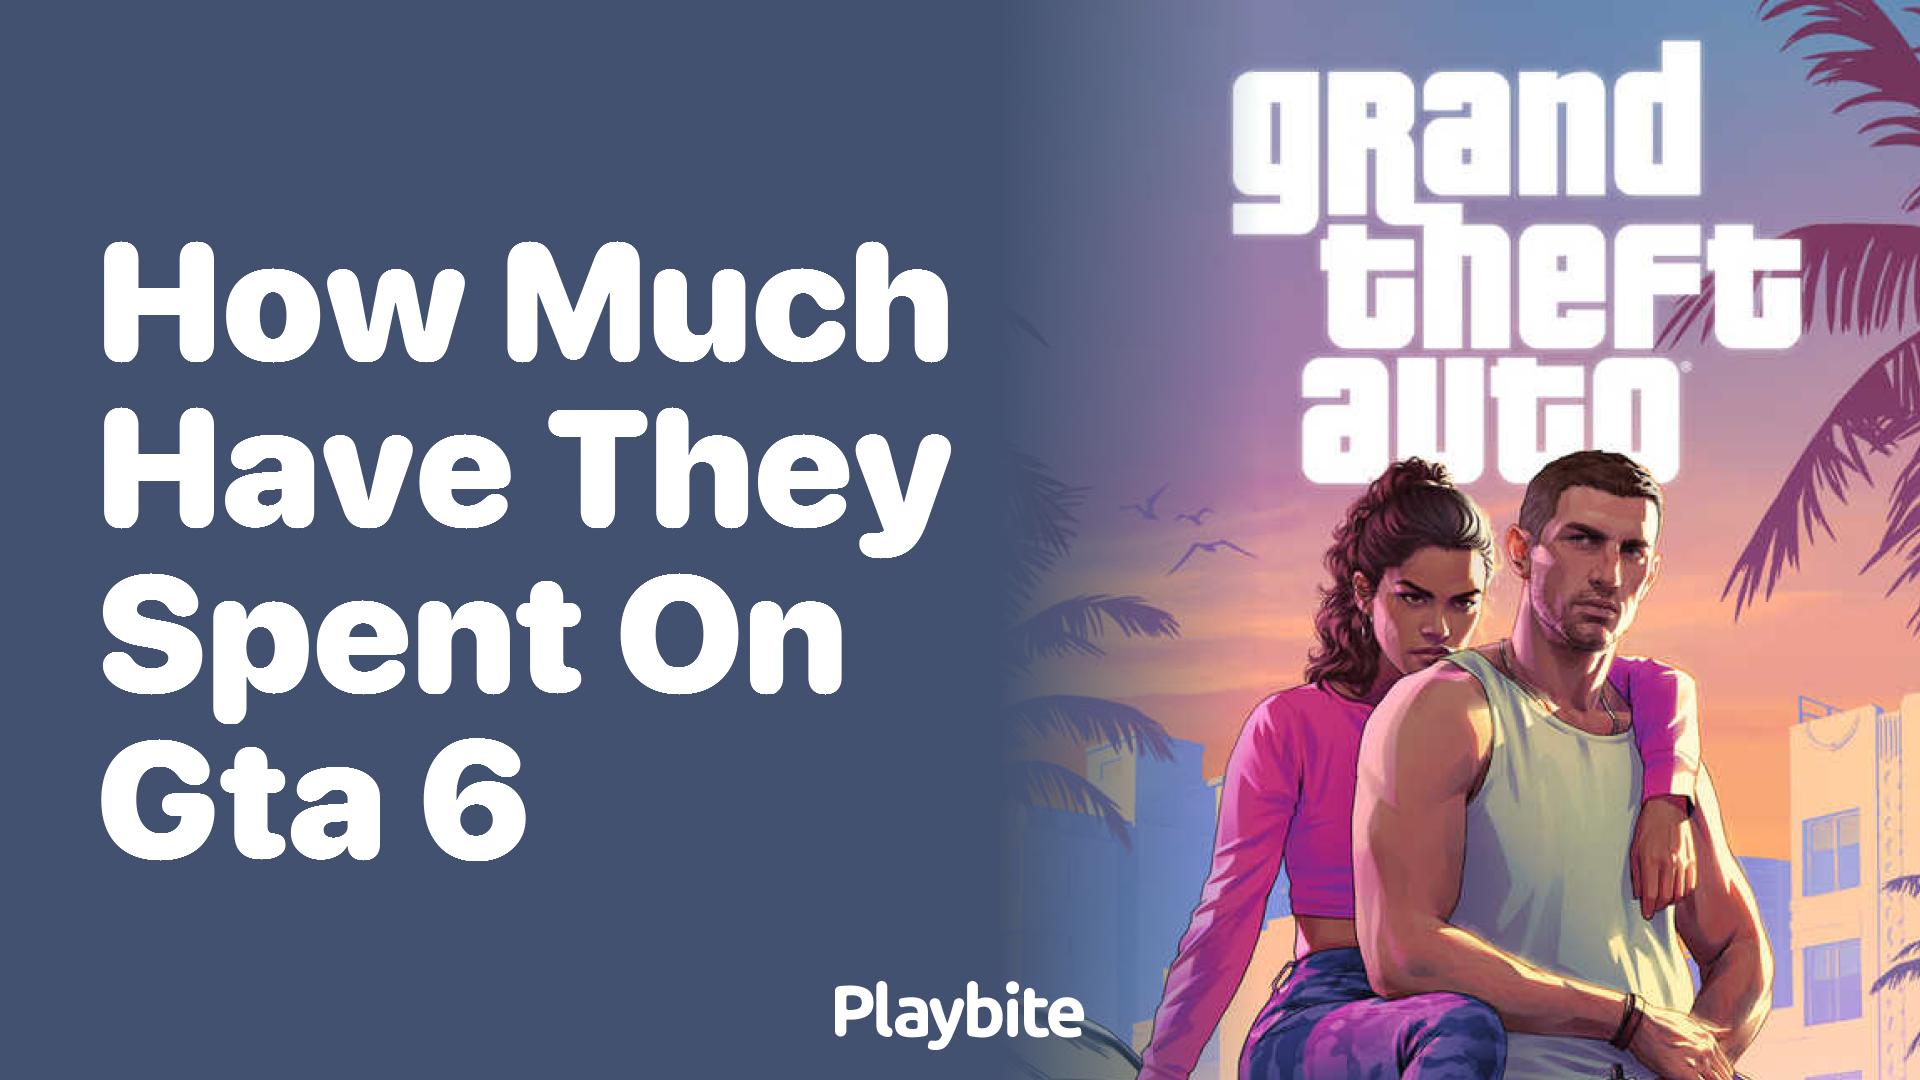 How much have they spent on GTA 6?